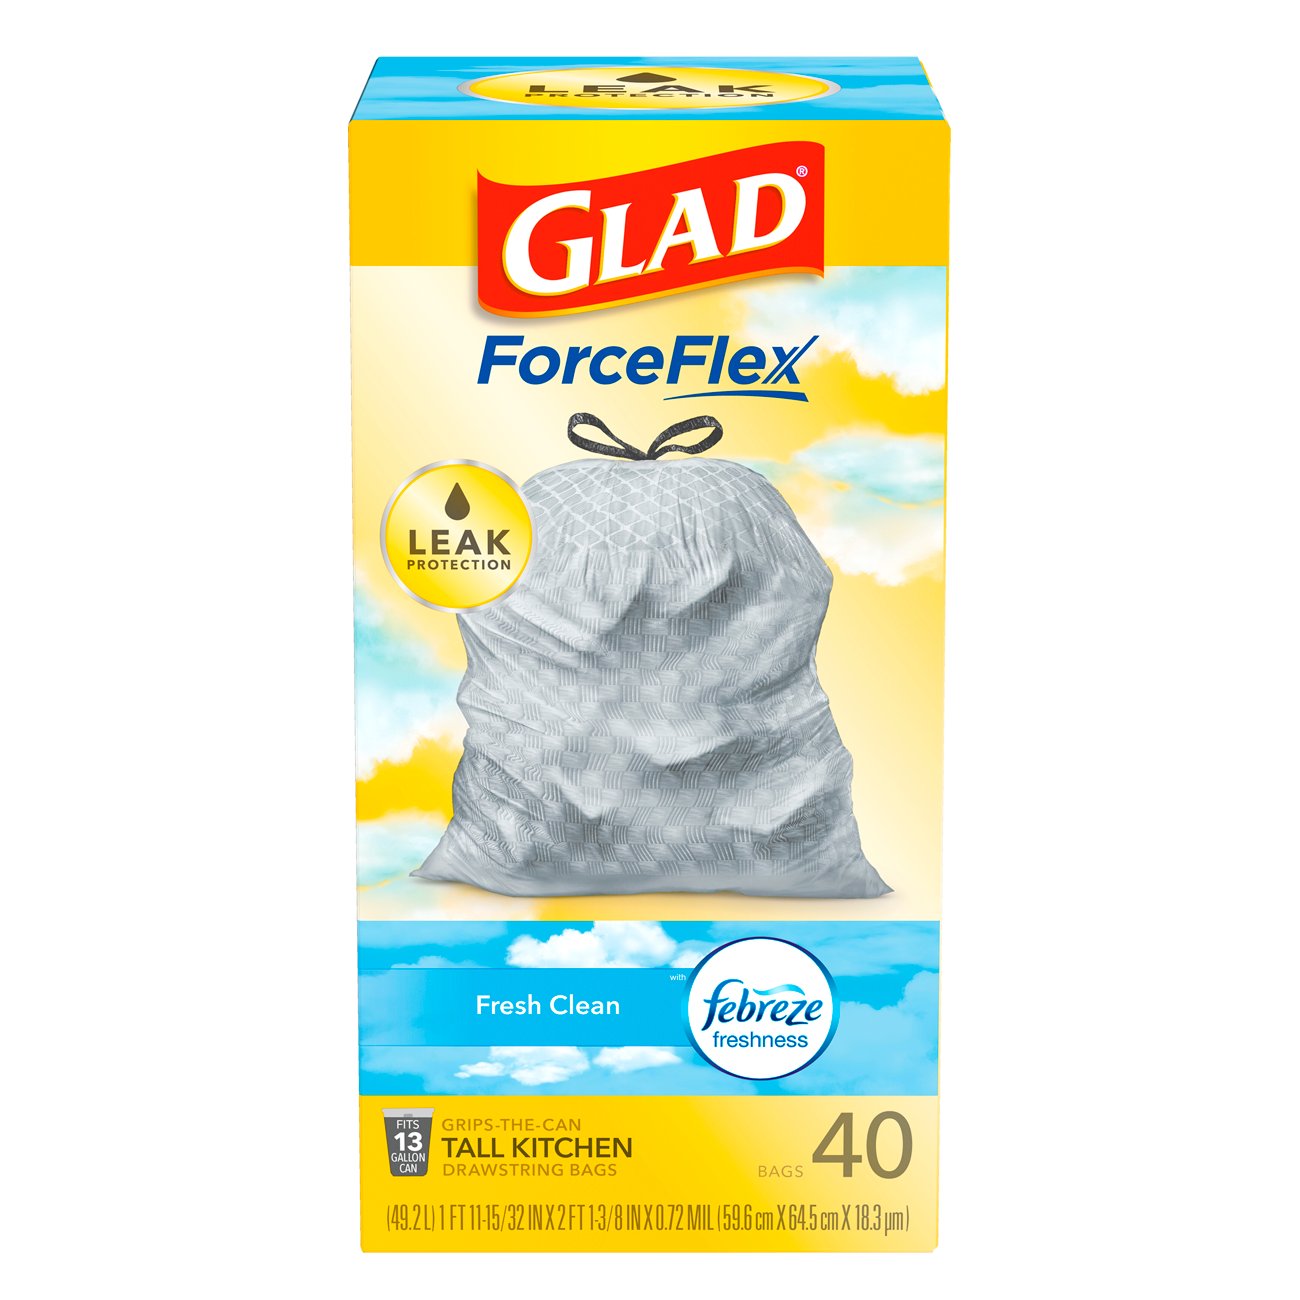 Glad ForceFlex MaxStrength with Febreze Fresh Clean Scent Extra